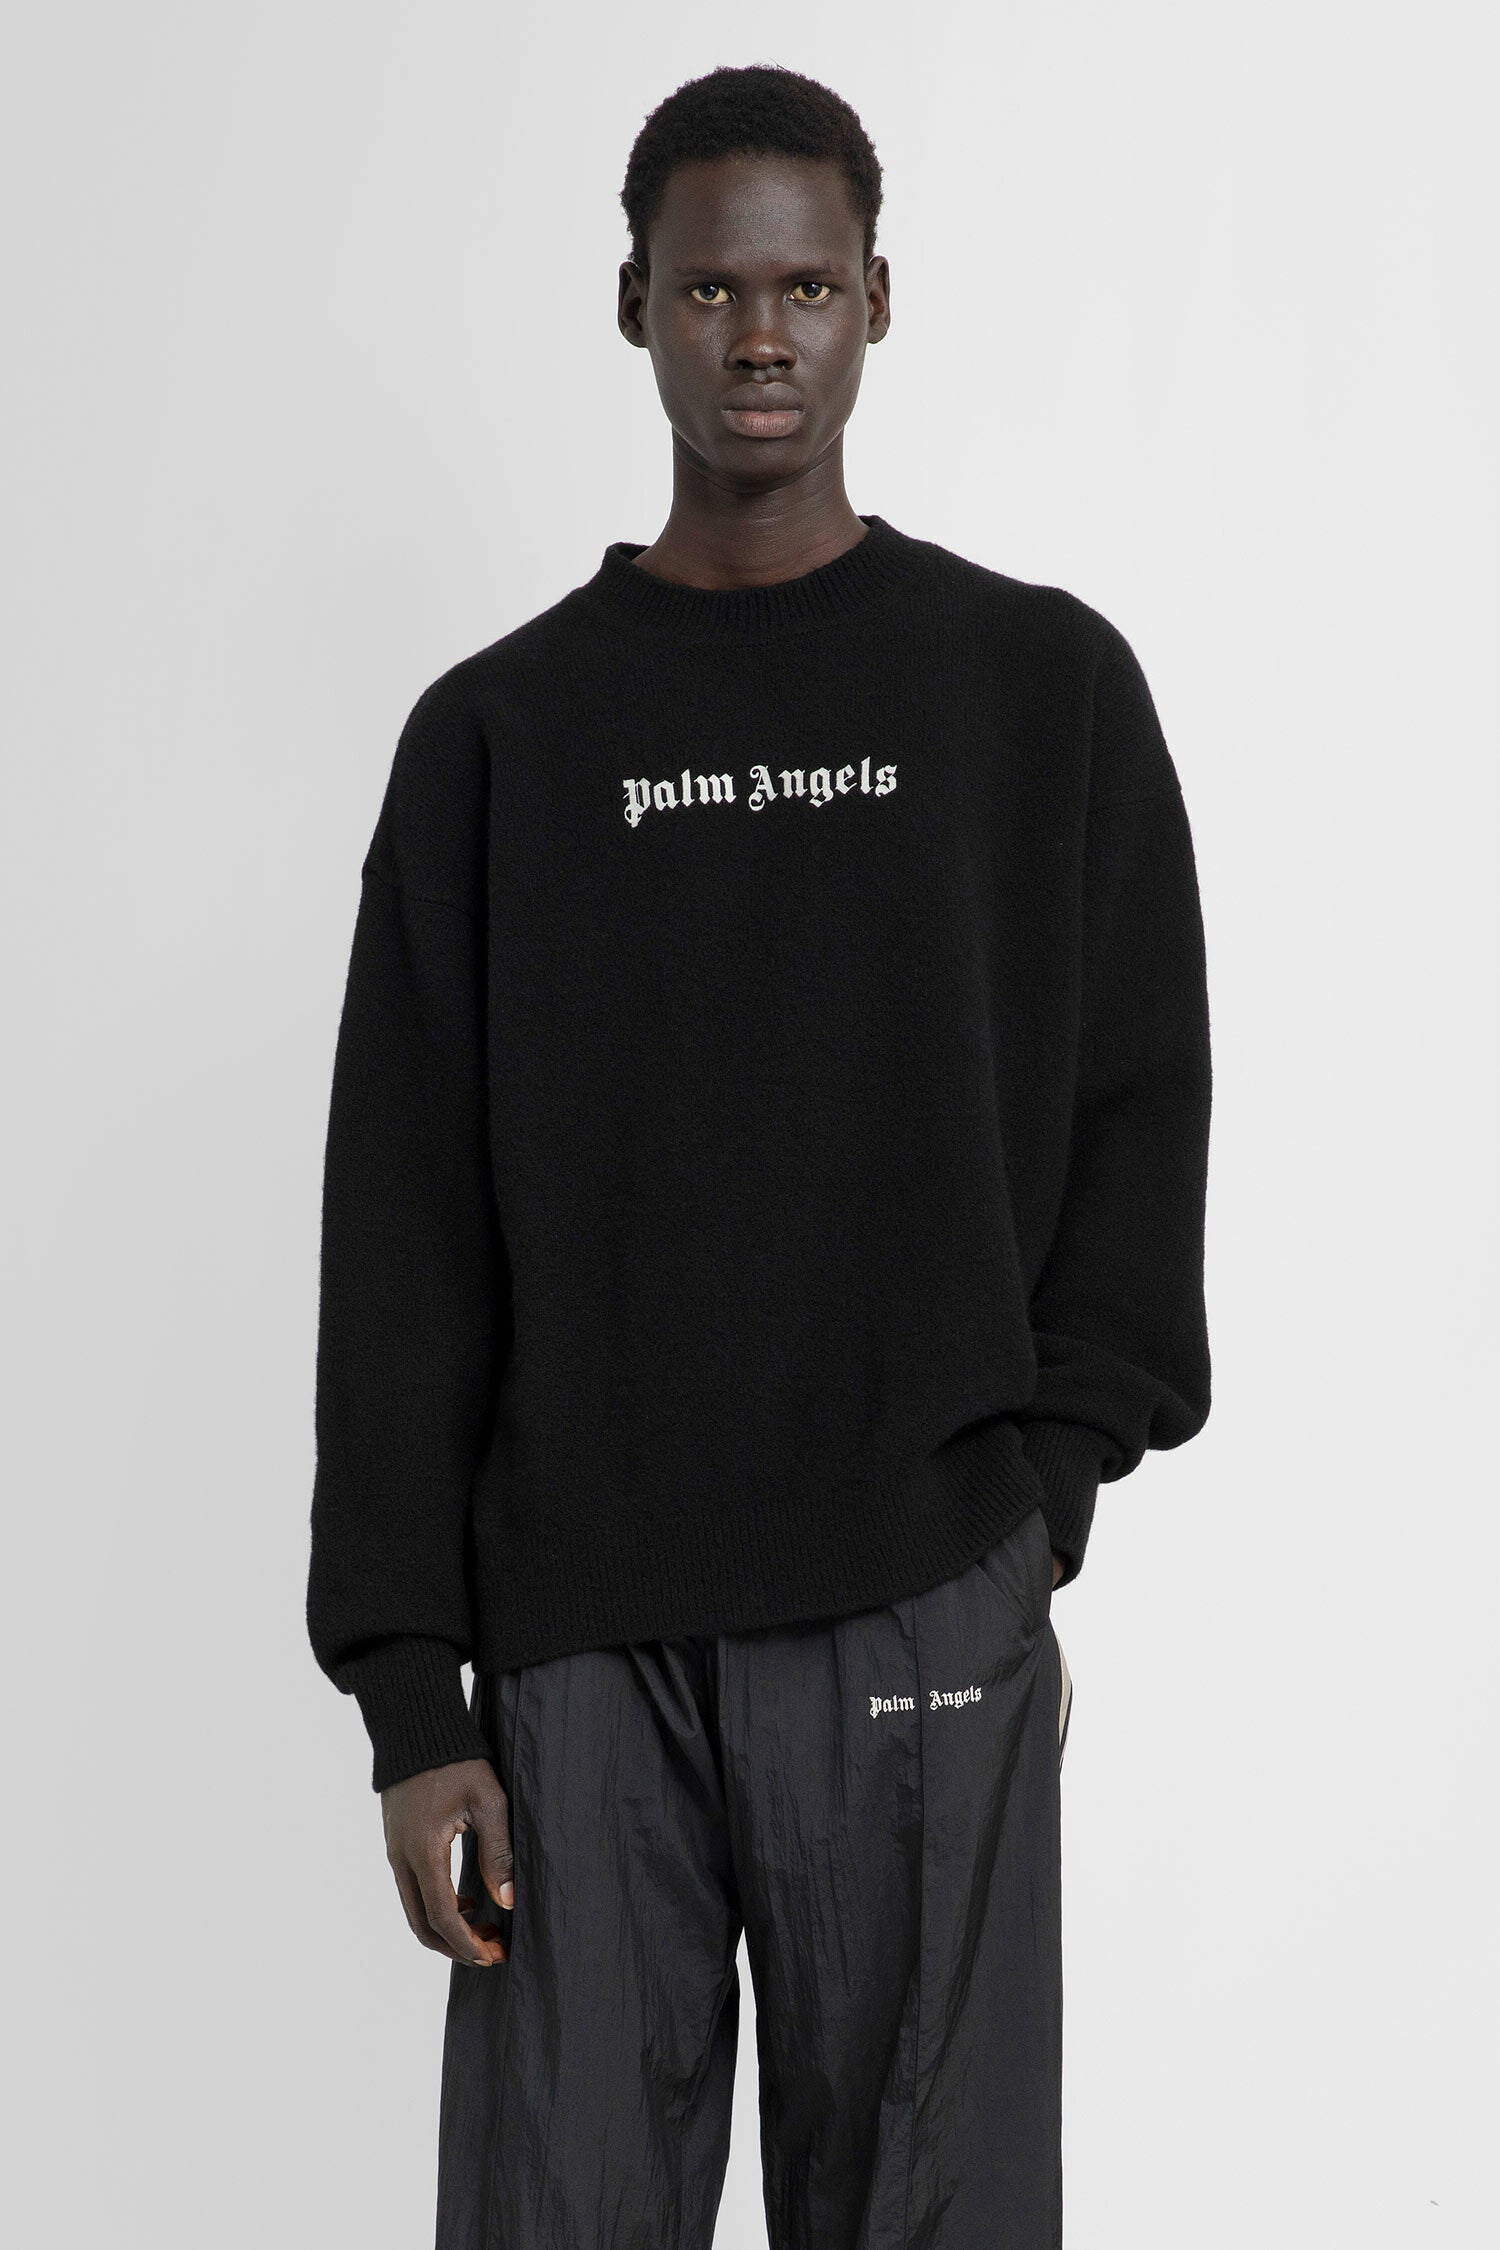 Palm Angels Pa Monogram Pullover in Black for Men